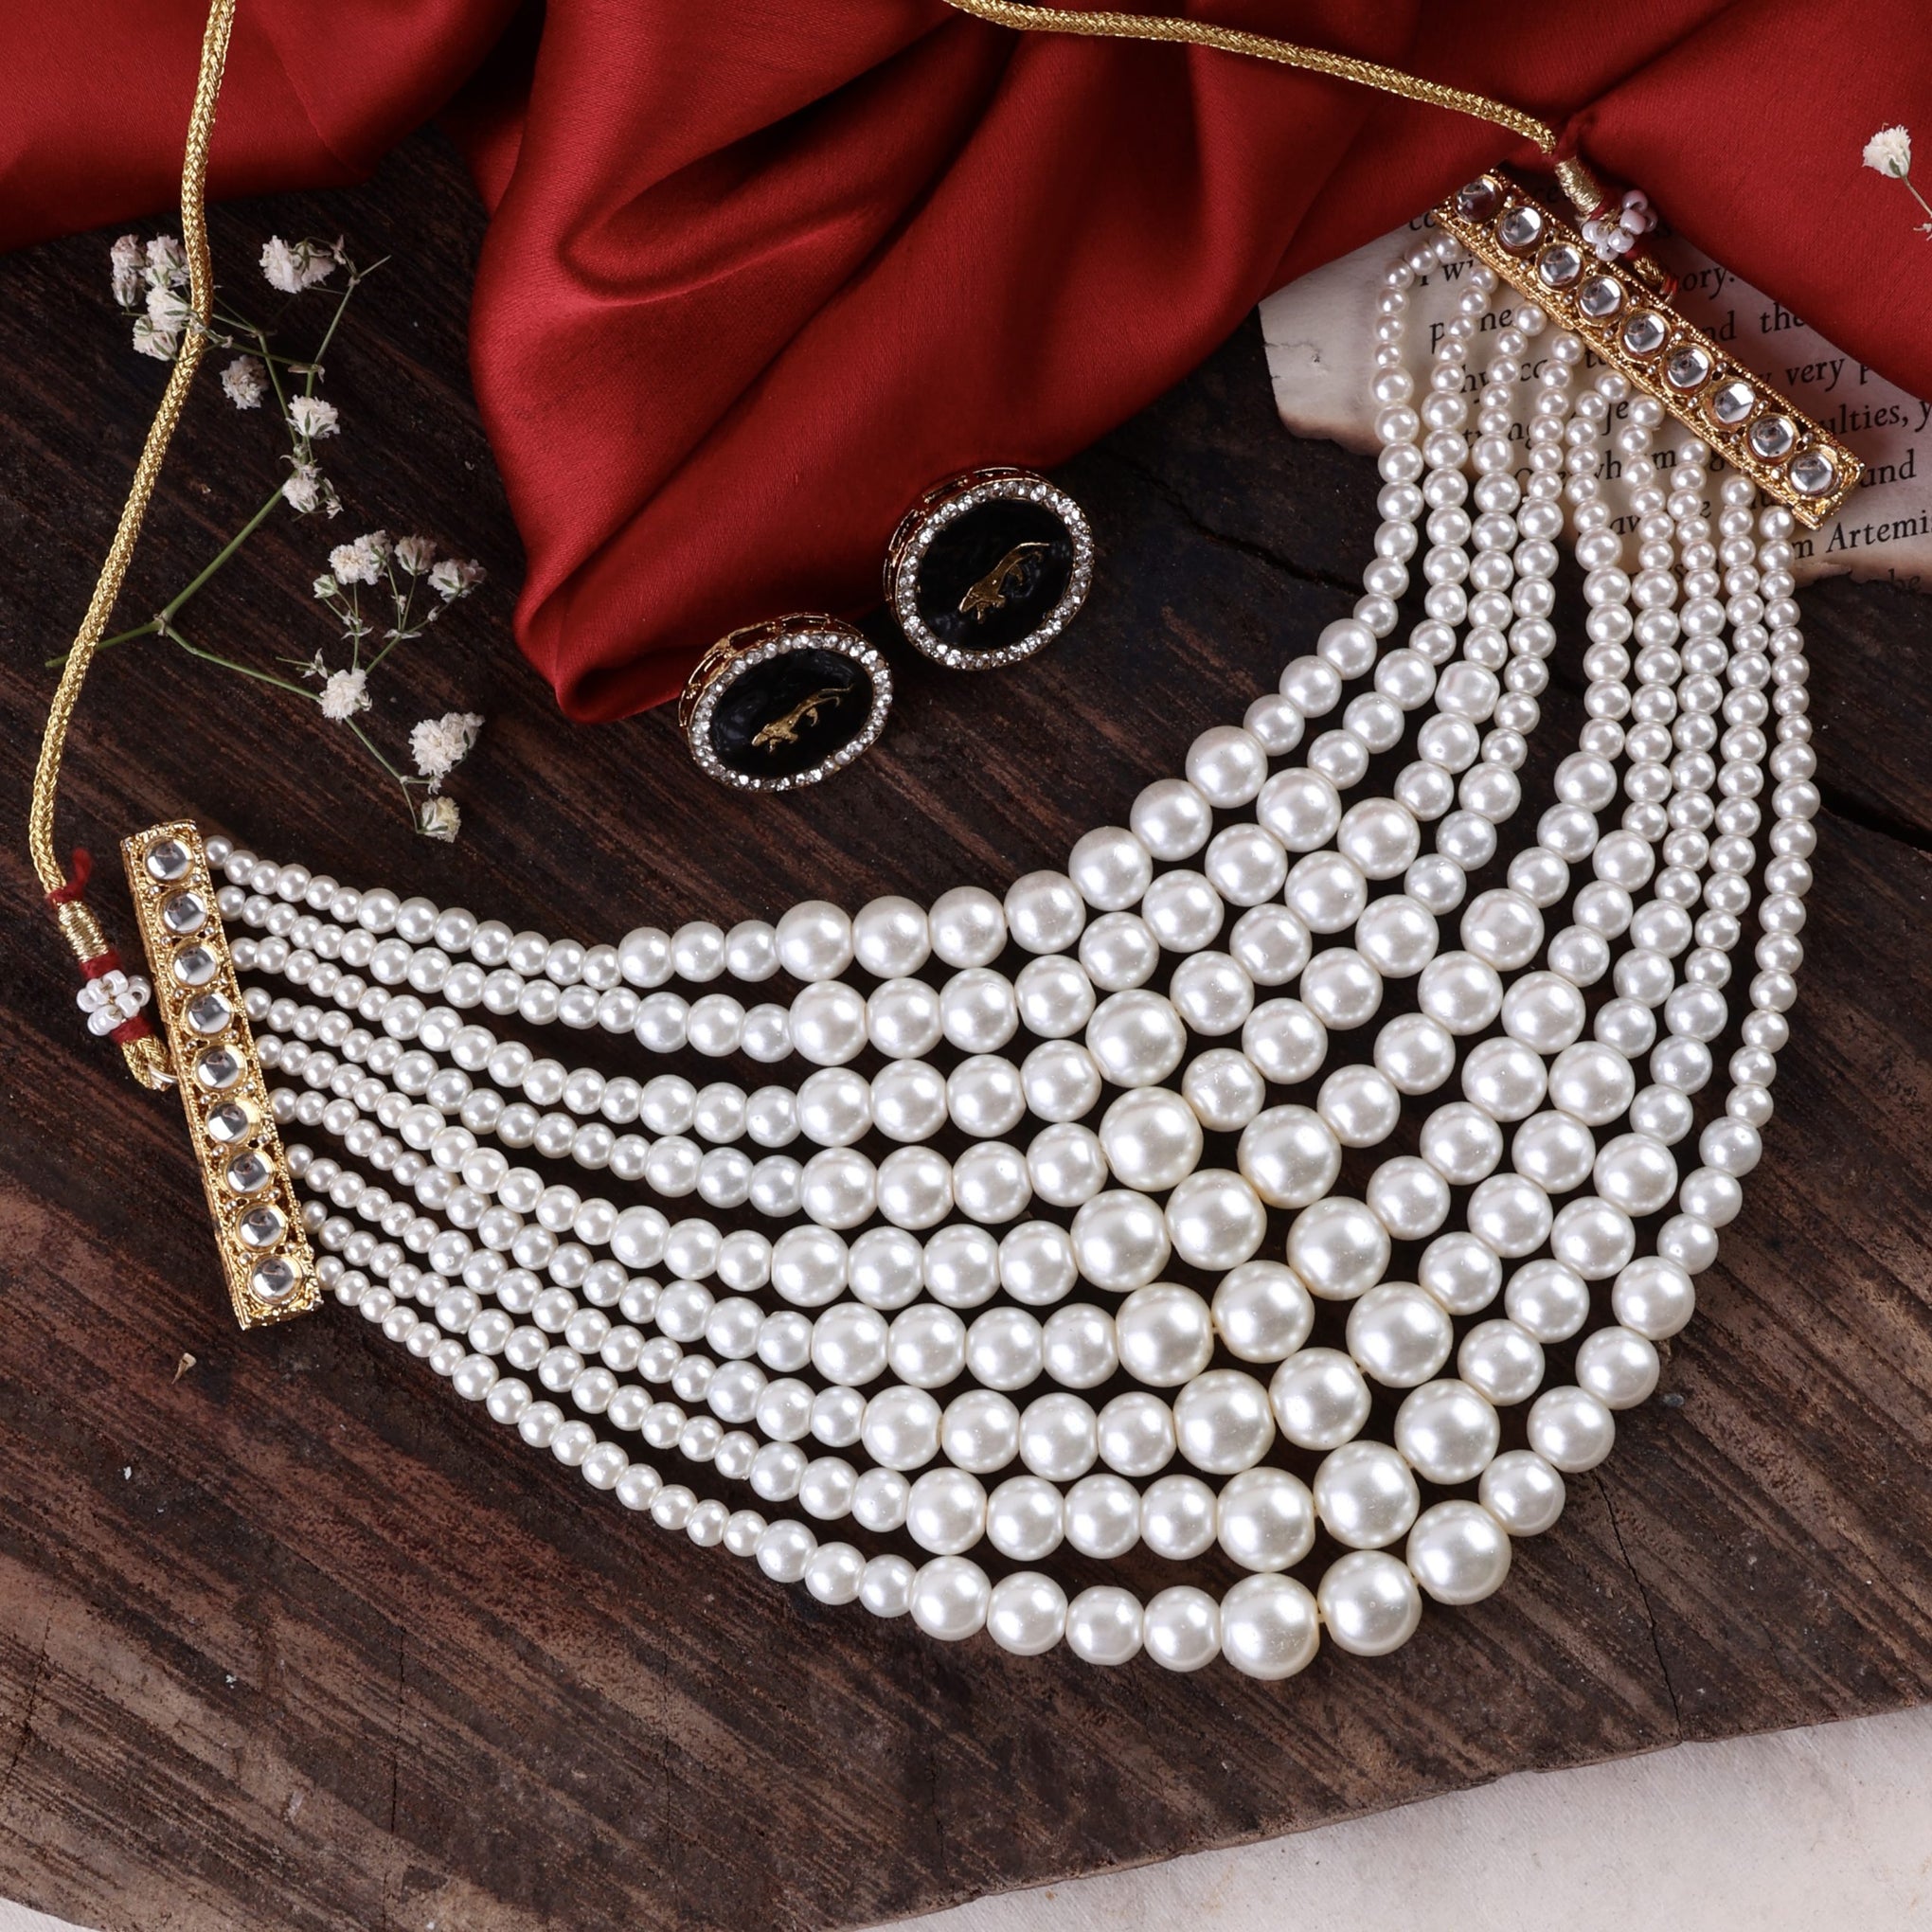 Raha Pearl Statement Necklace set with Stud inspired by Alia Bhatt